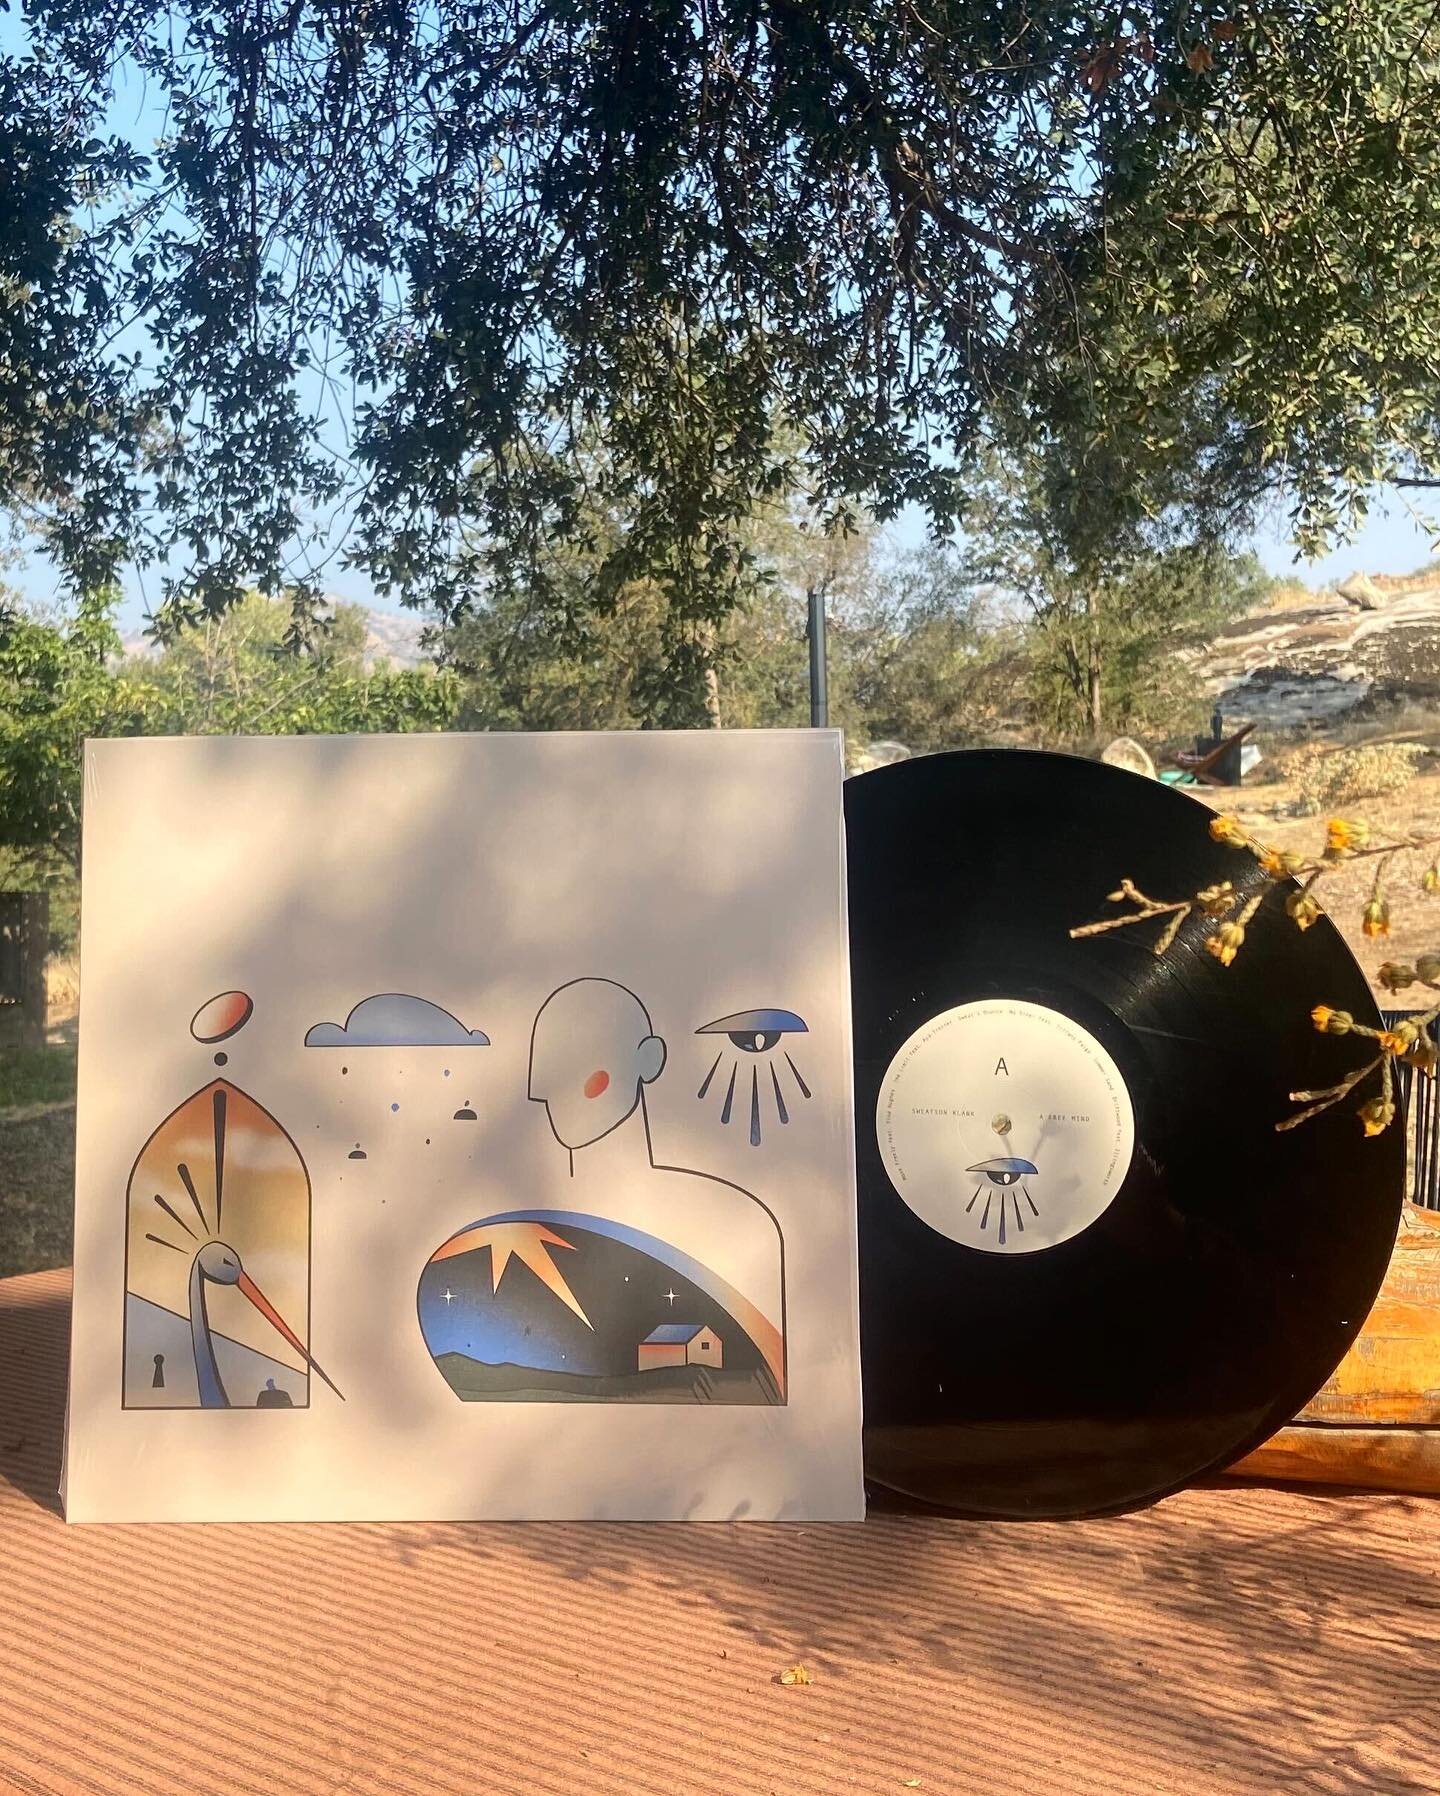 The @sweatsonklank &lsquo;A Free Mind&rsquo; vinyl is now shipping! Thank you to all who pre-ordered this timeless work and one of @kcrw&rsquo;s Top 30 charting records. Pick up your copy while they last via link in bio and hear the album, mixed in D